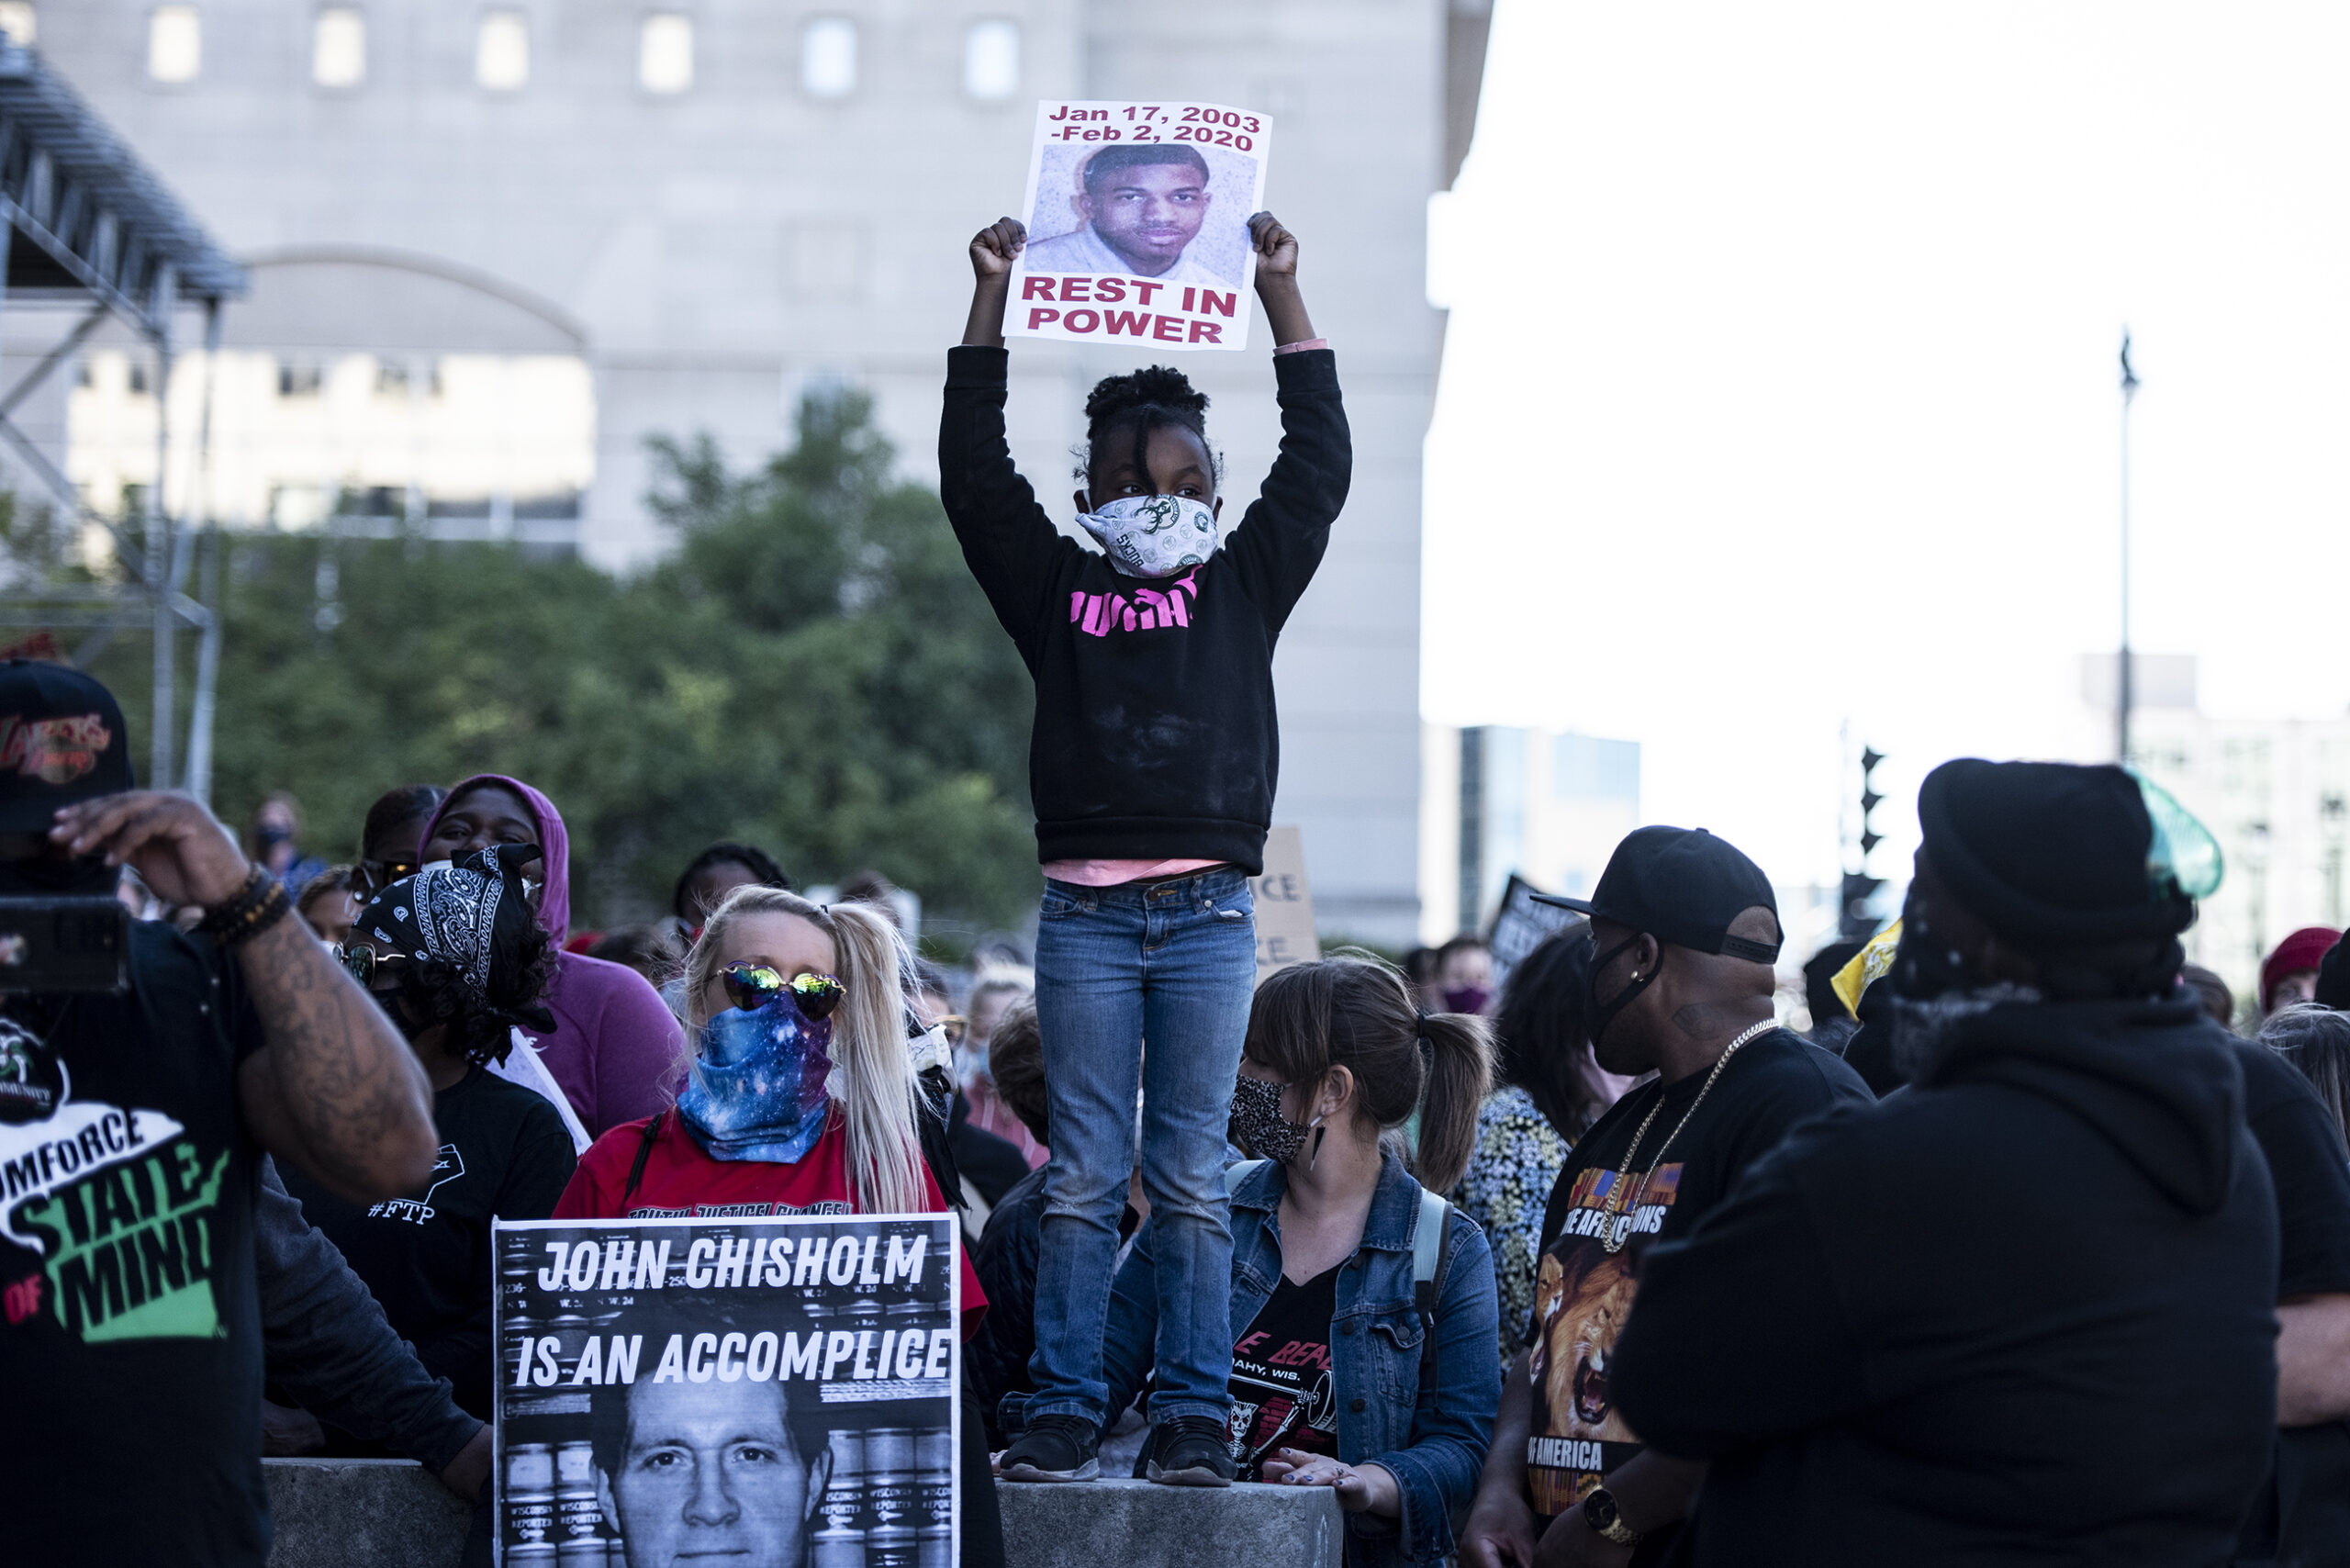 a child stands on a ledge above the crowd and holds a sign above her head